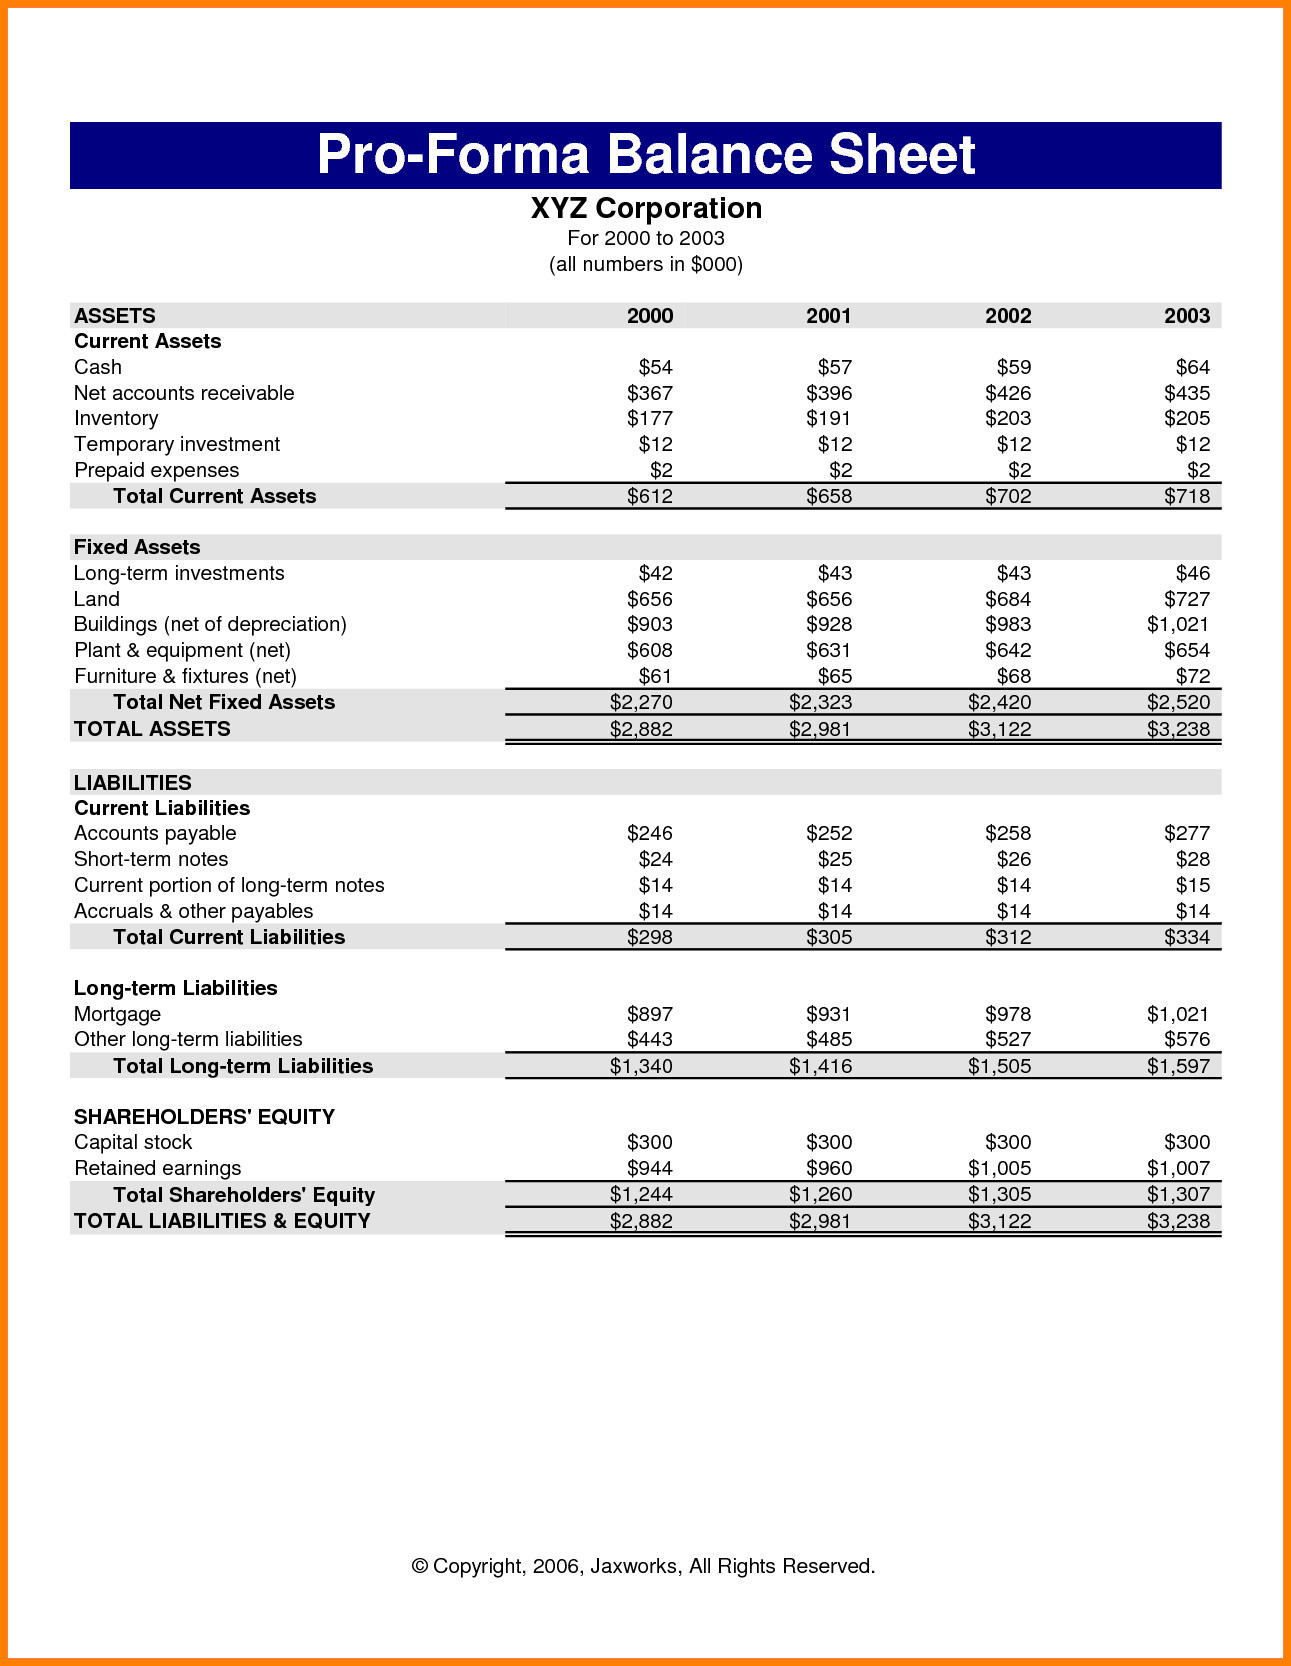 Pro forma Financial Statement Template 10 Sample Pro forma Financial Statements